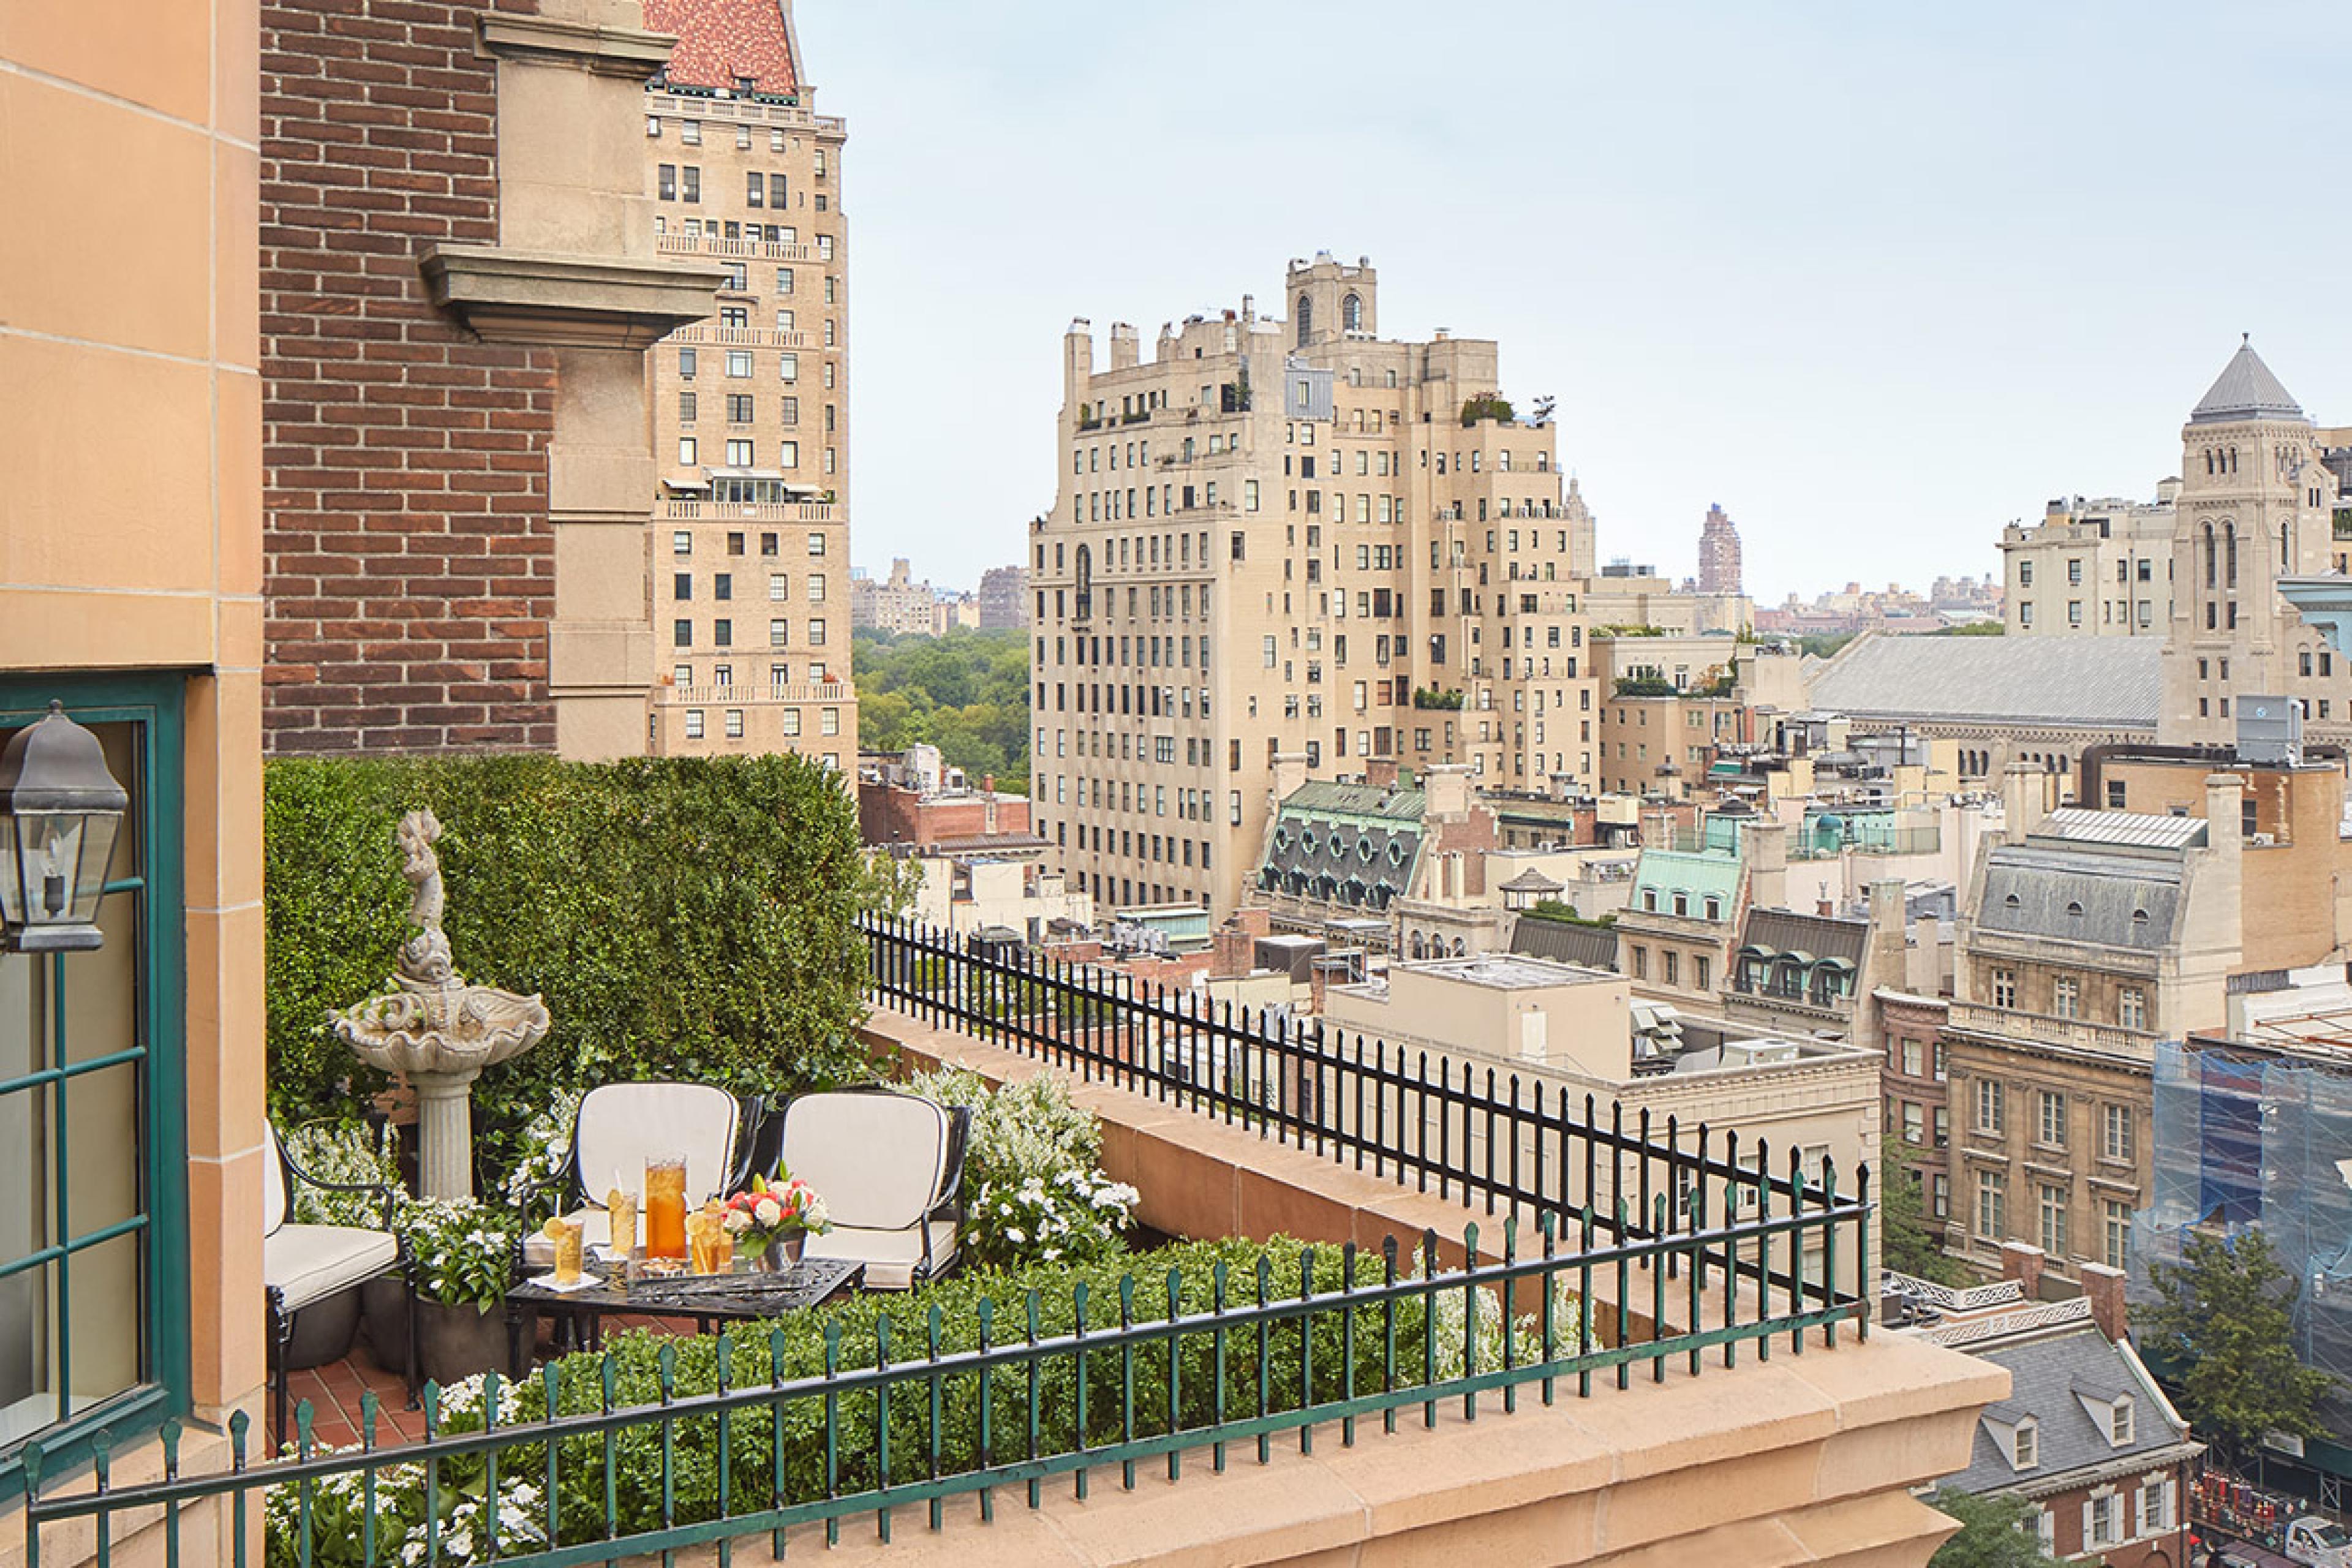 hotel terrace in nyc with seating with ivy and skyline views from brick building